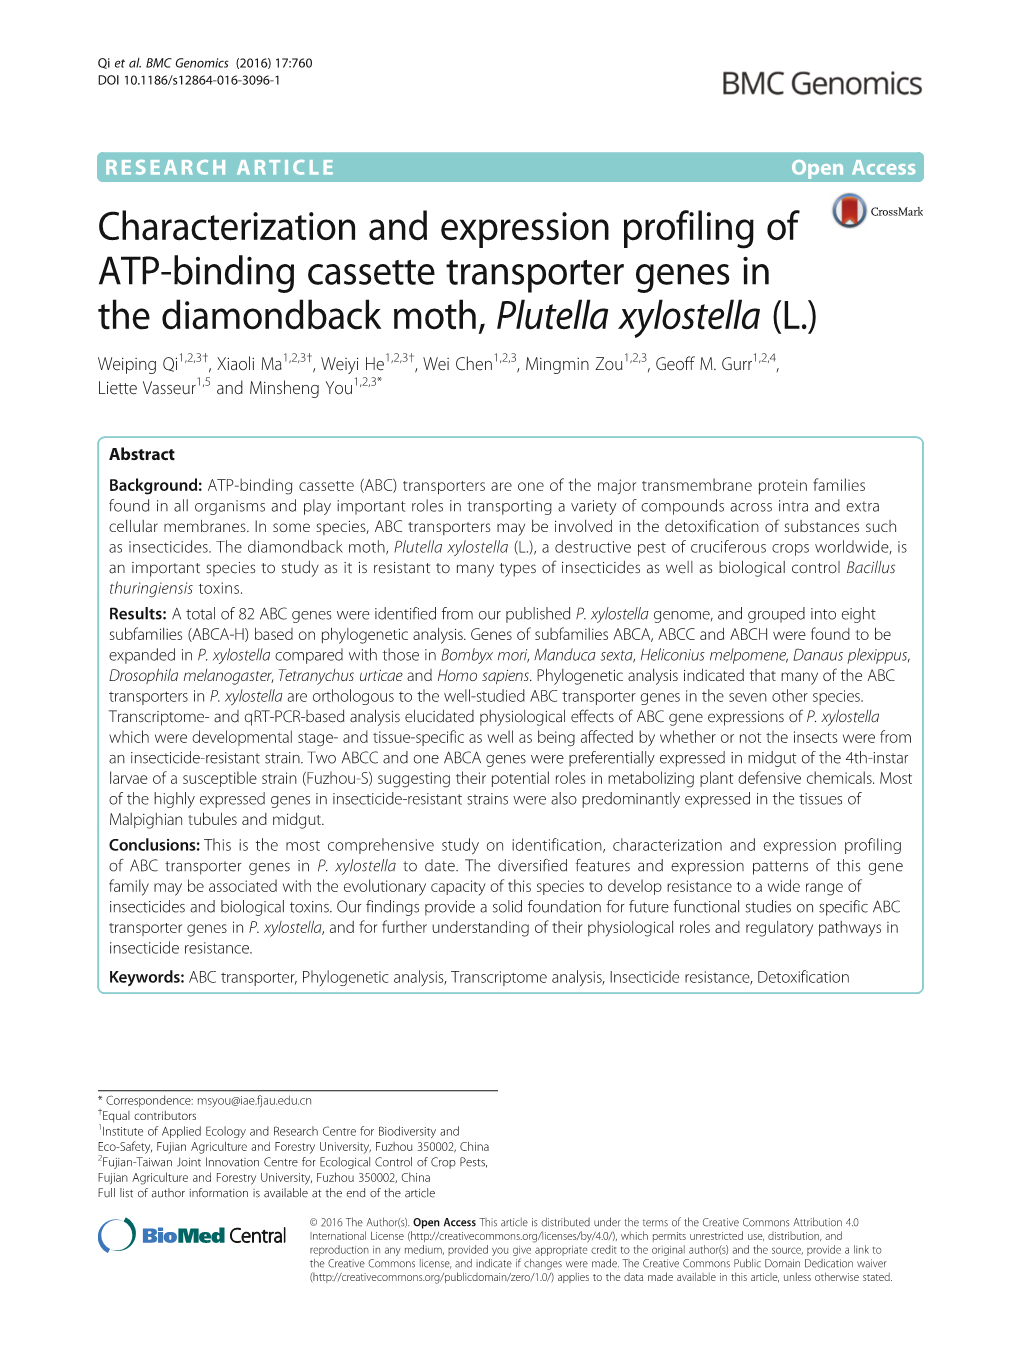 Characterization and Expression Profiling of ATP-Binding Cassette